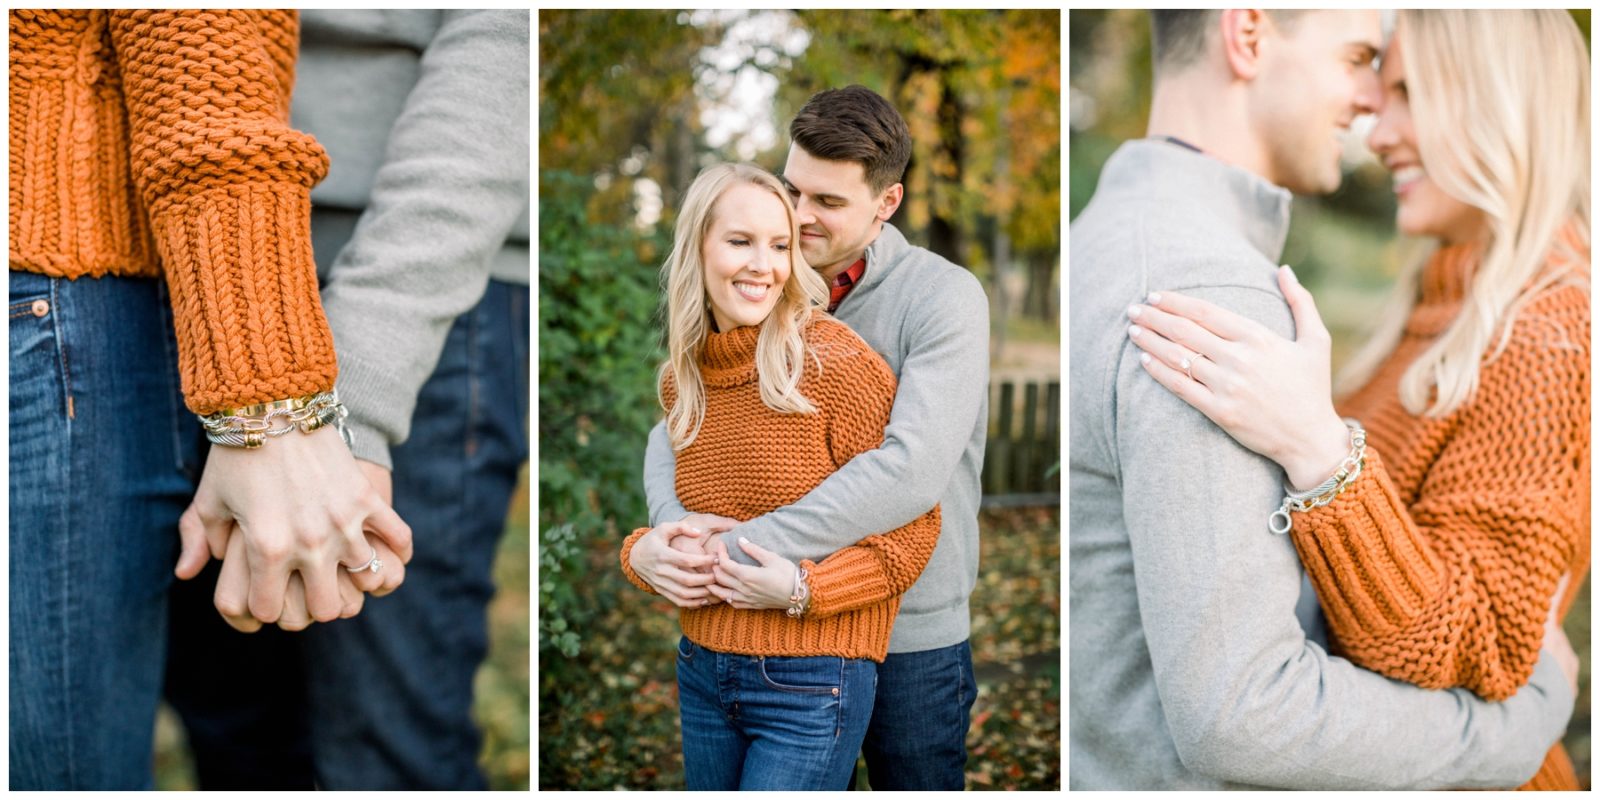 Couple holding hands, hugging and showing loving gestures towards each other.